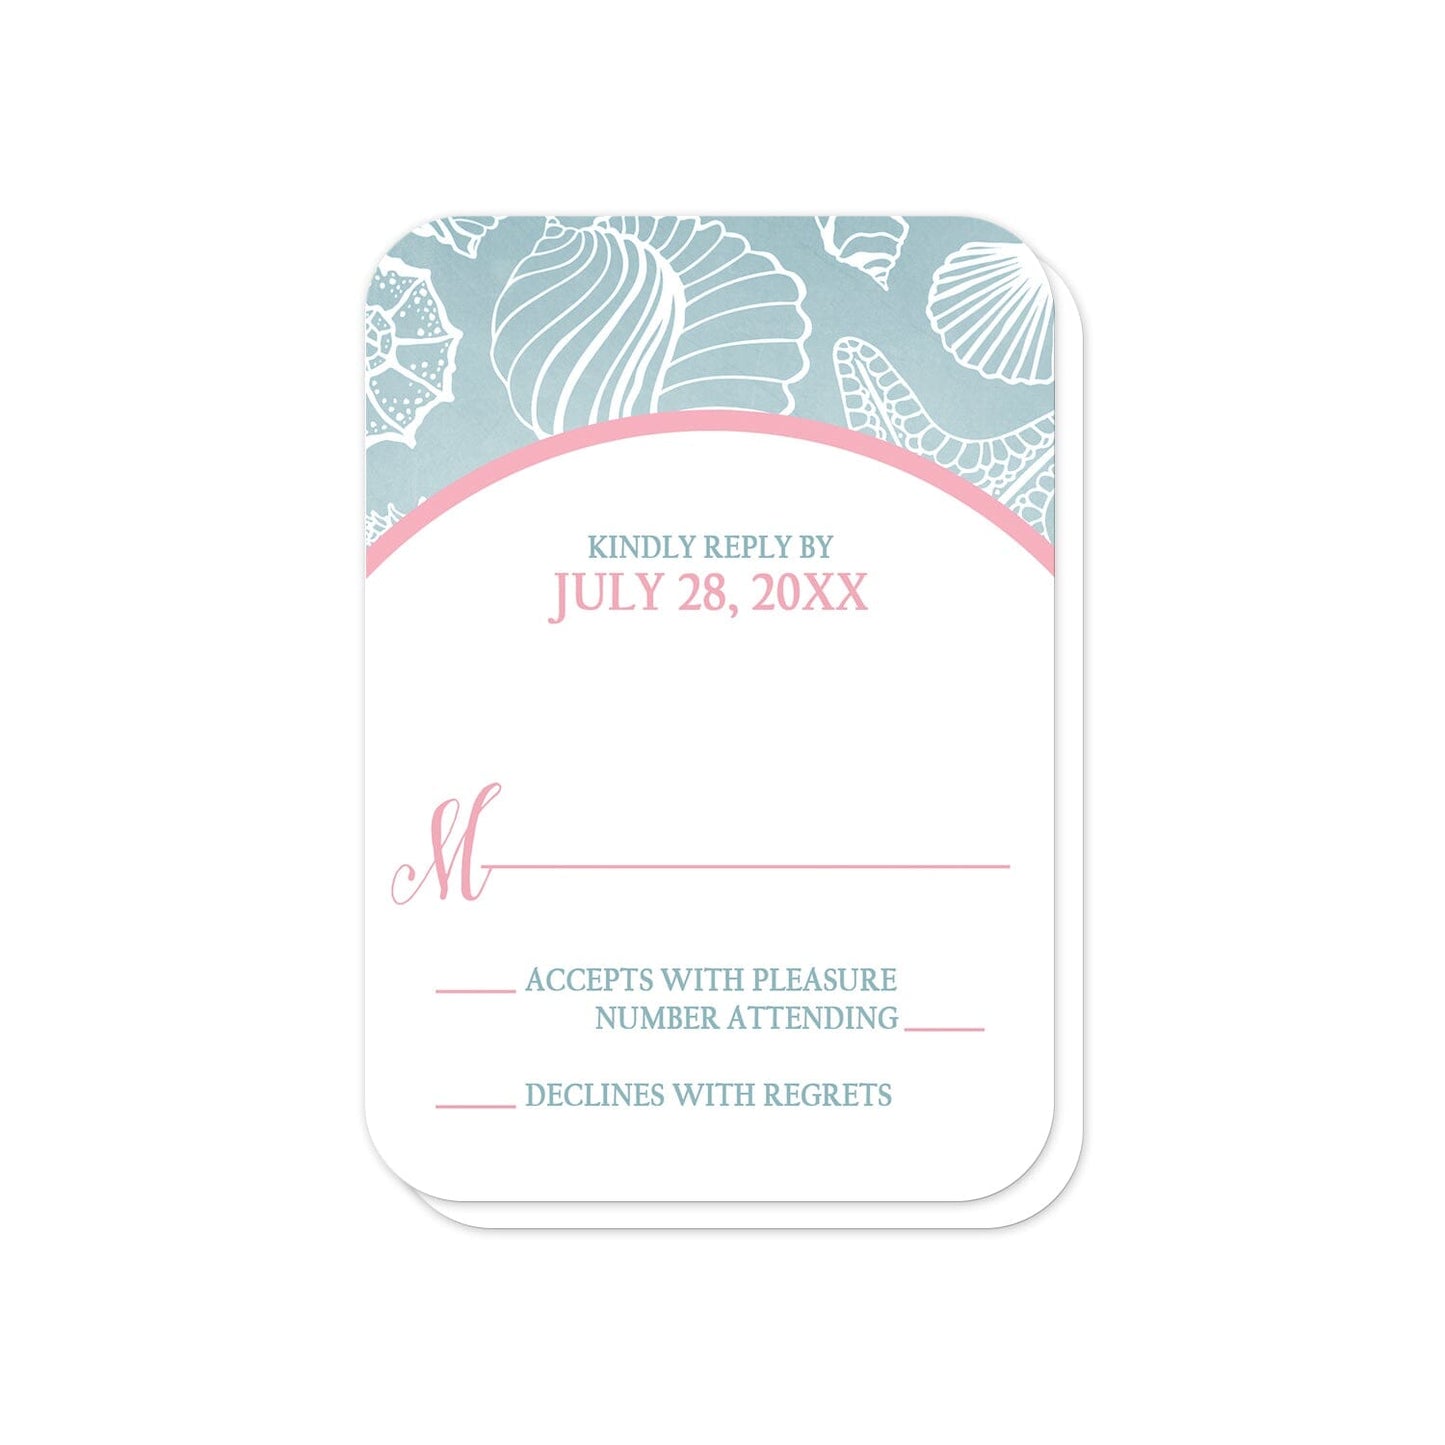 Blue Seashell Pink Beach RSVP Cards (with rounded corners) at Artistically Invited.